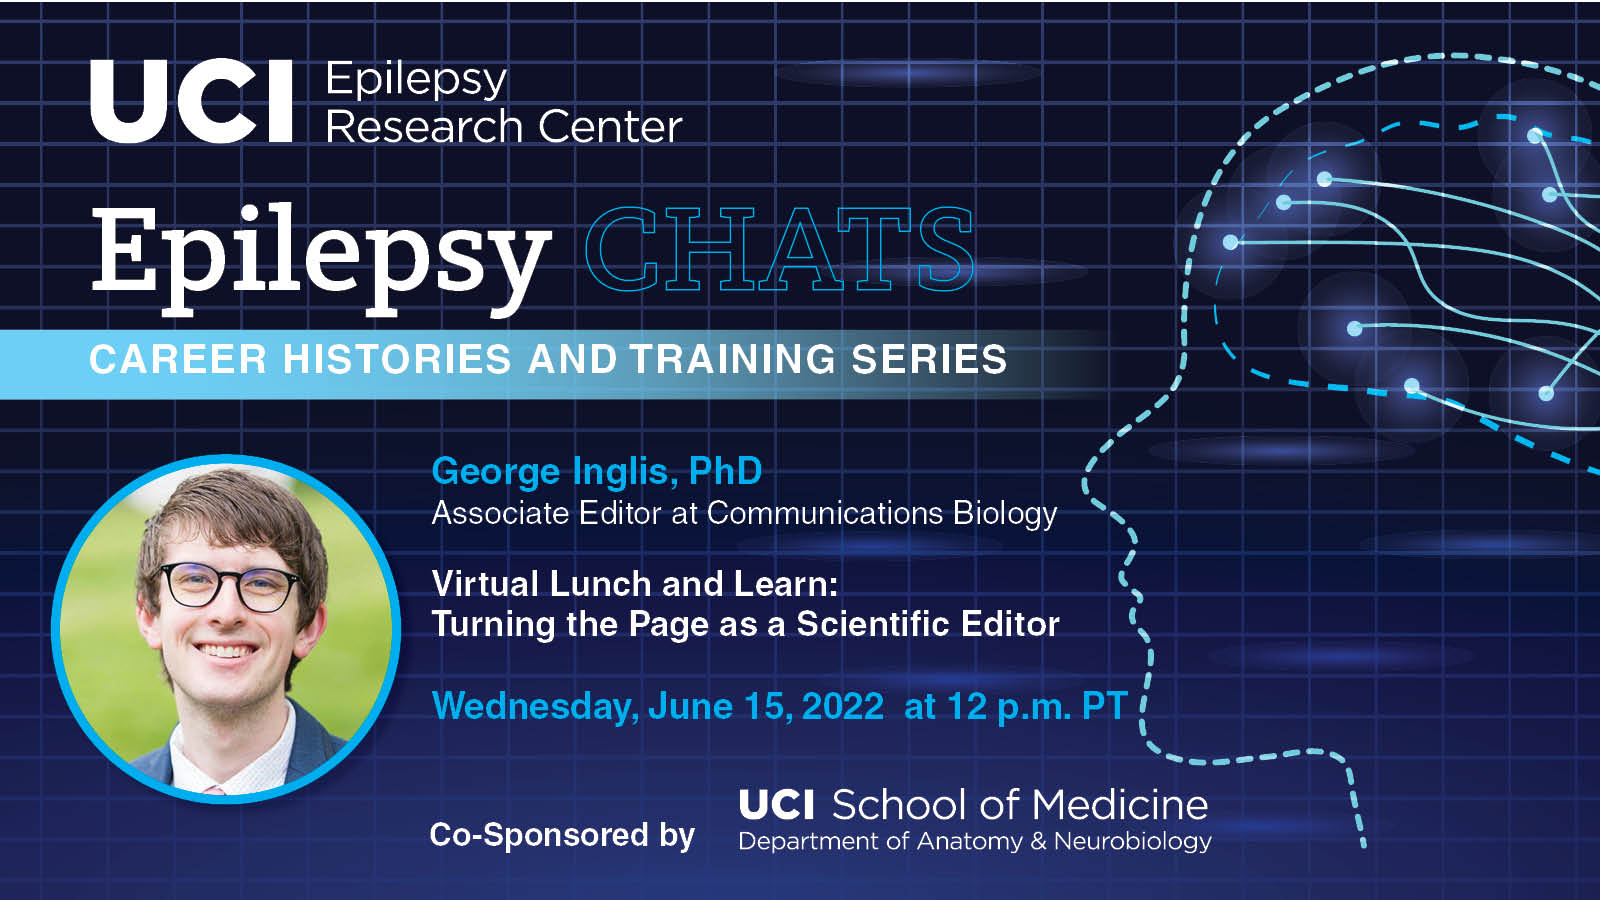 Epilepsy Chats. Career histories and training series. George Inglis, Ph.D. Associate Editor at Communications Biology Virtual Lunch and Learn: Turning the Page as a Scientific Editor.